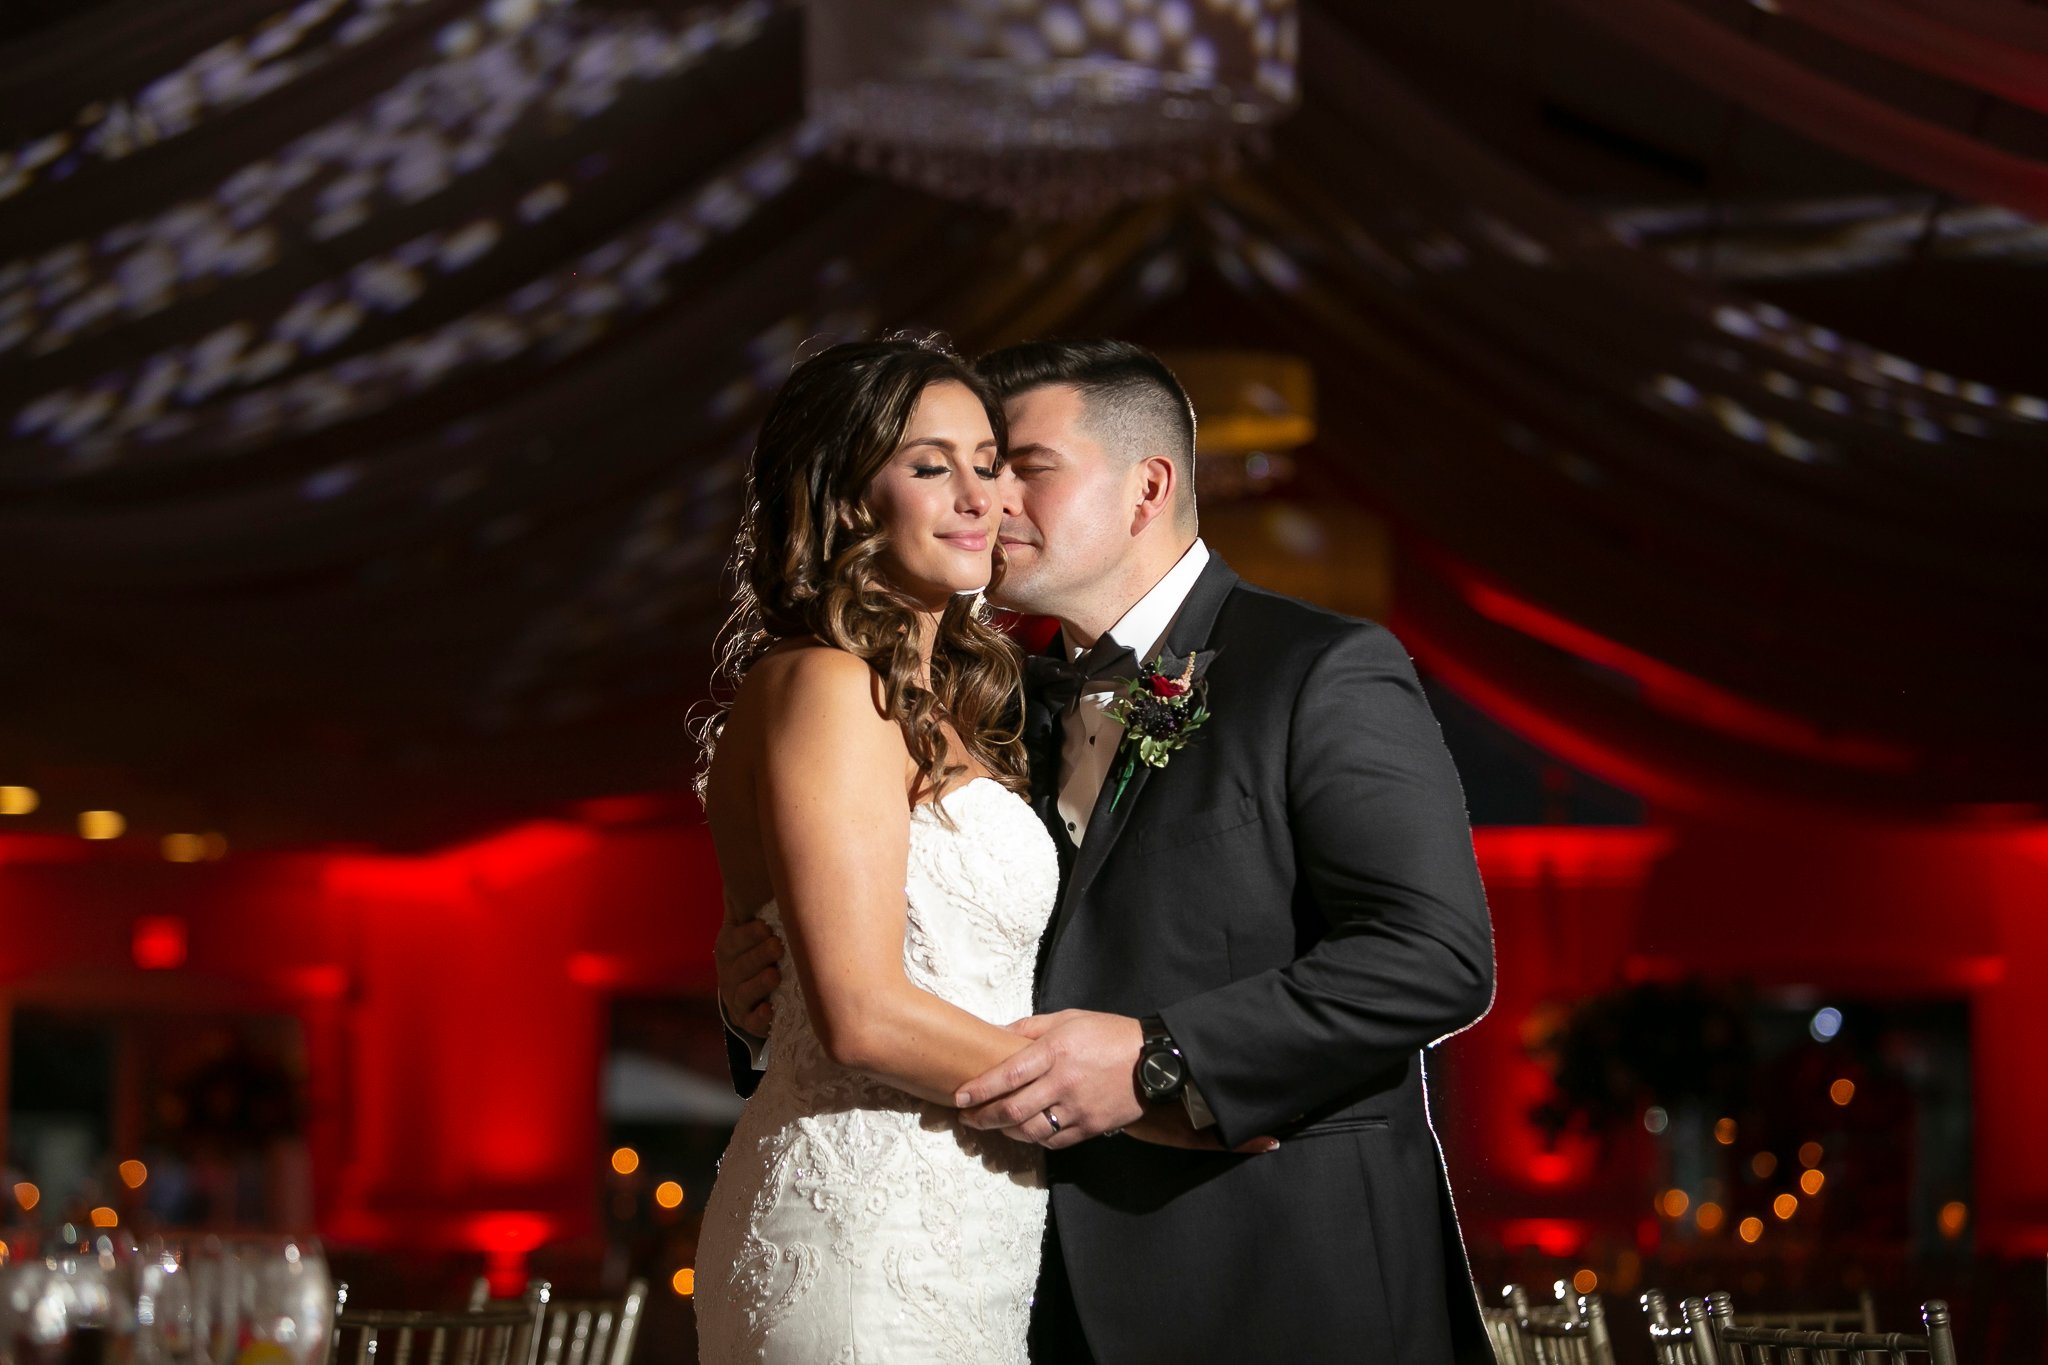 Flowerfield Celebrations - Bride and Groom Portrait in the Grand Ballroom